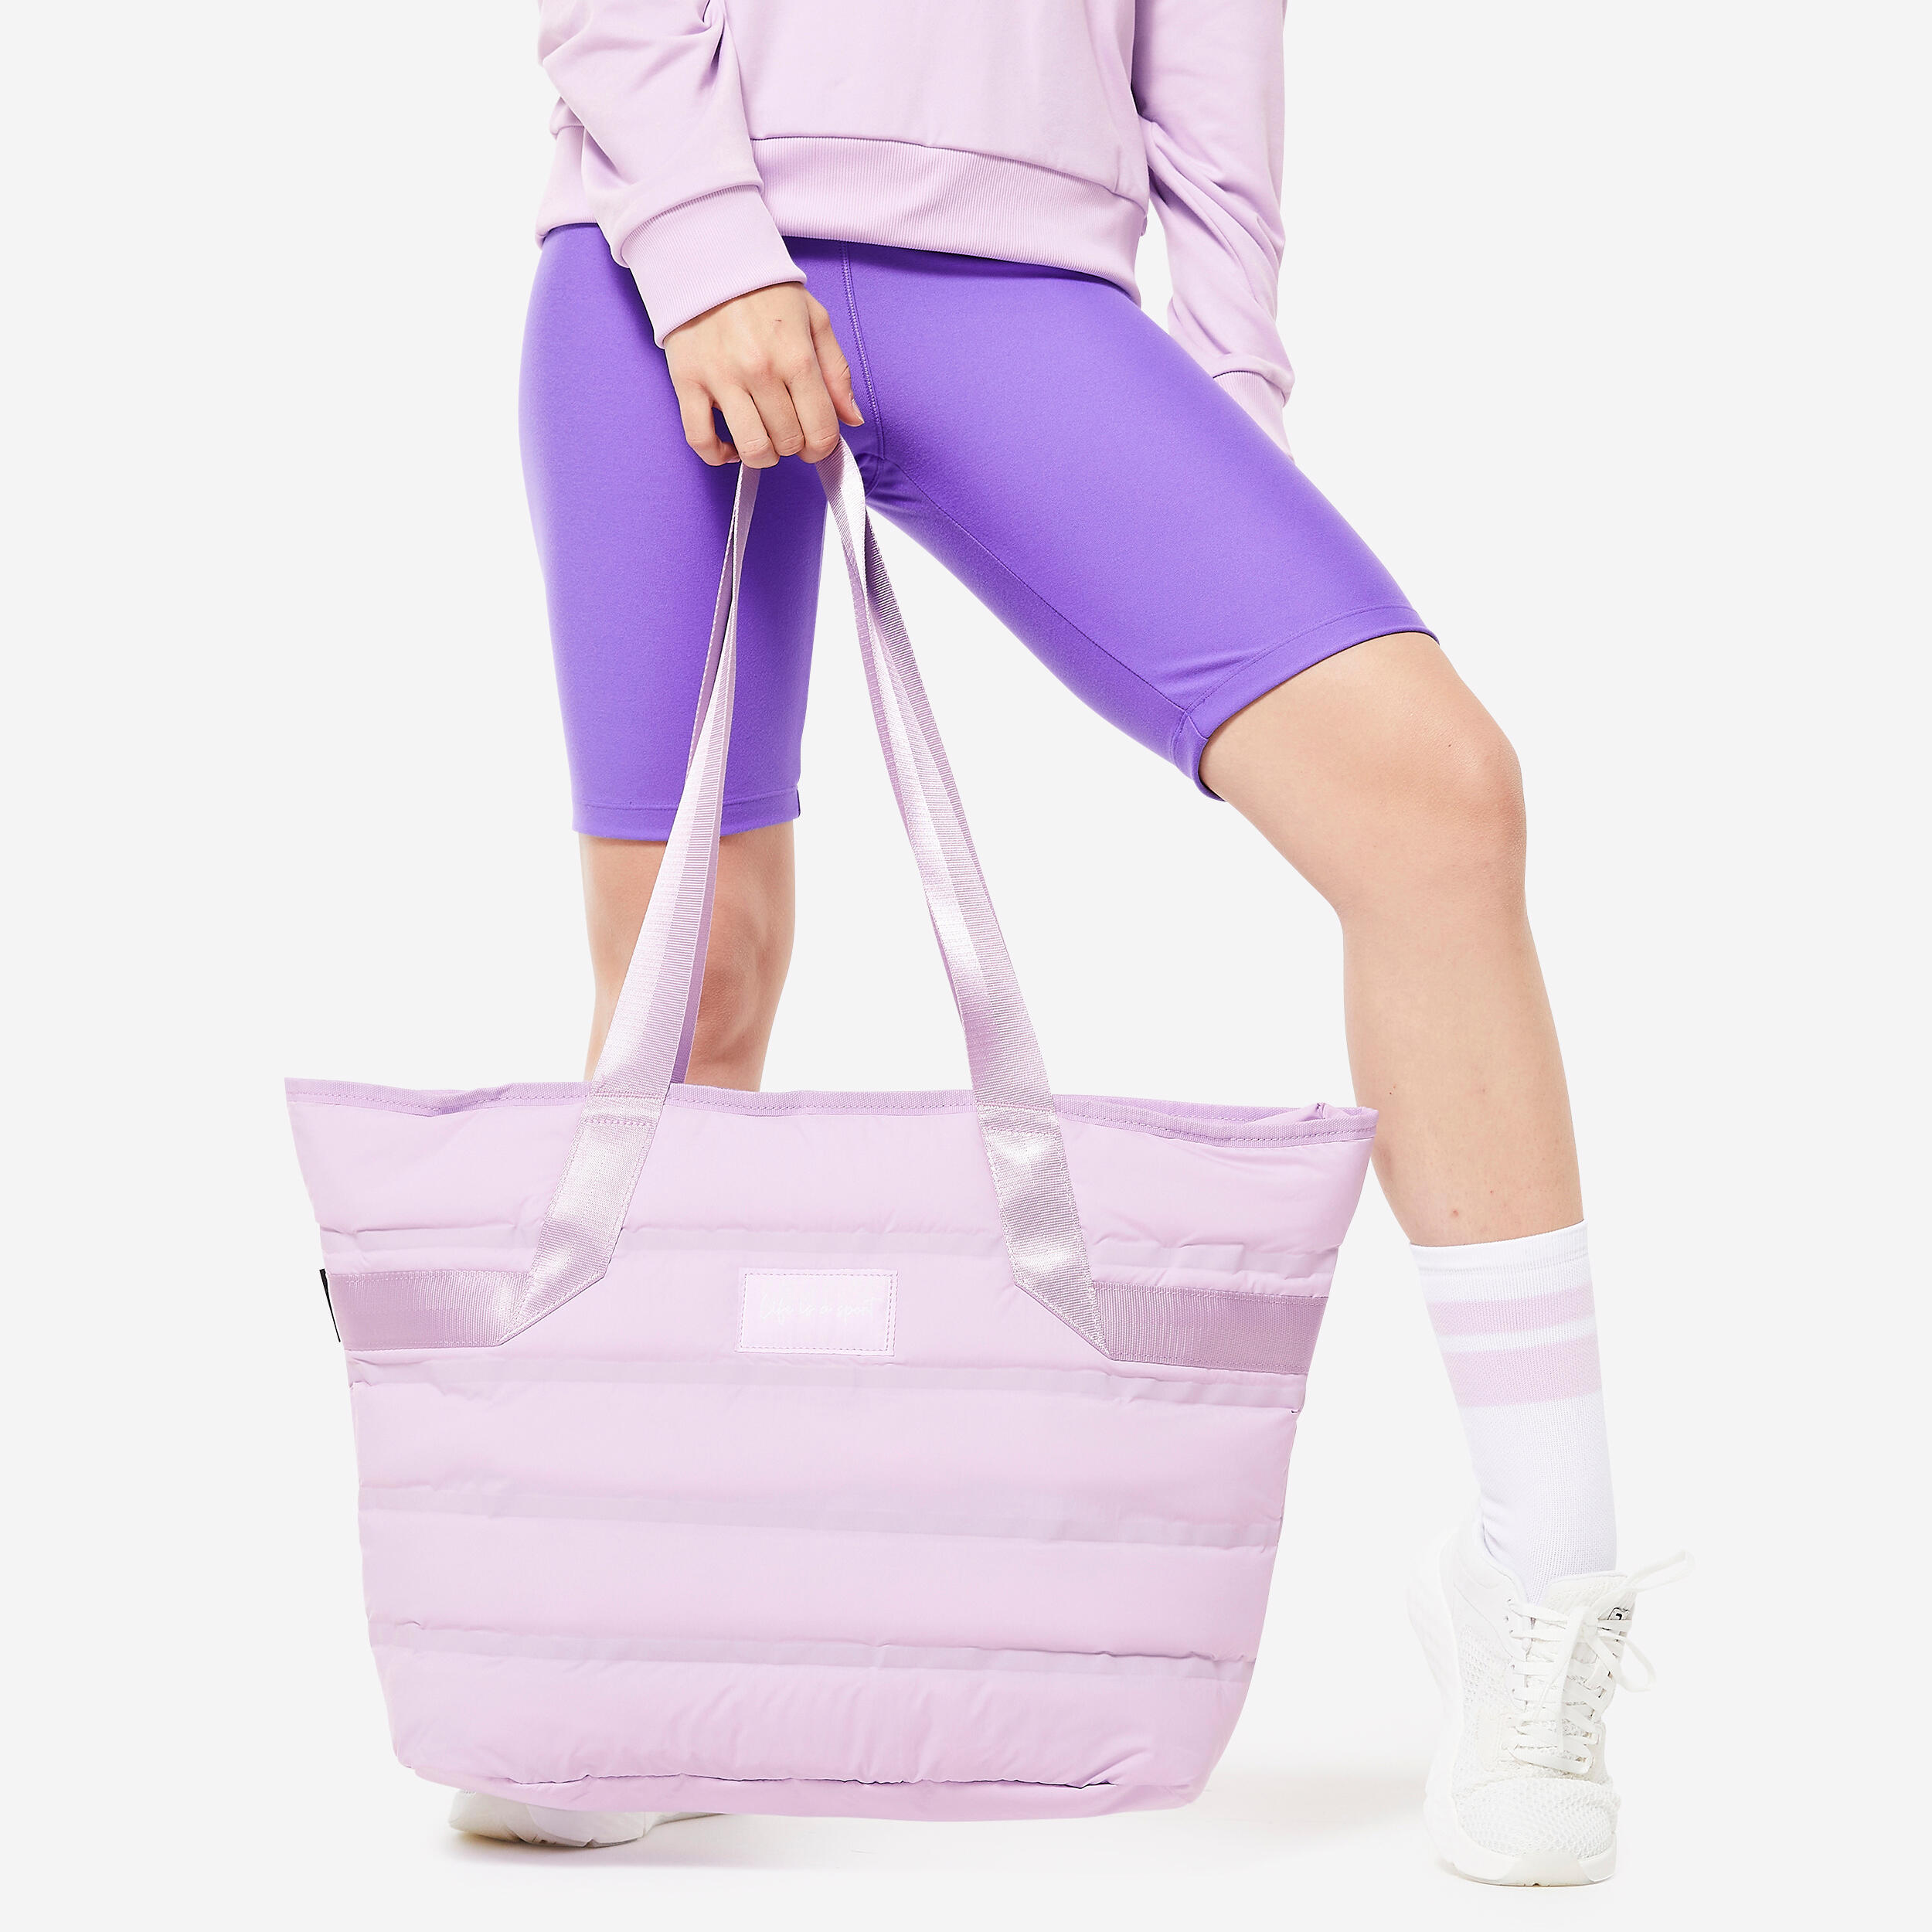 Women's 25 L Padded Fitness Training Tote Bag - Parma Violet 5/9